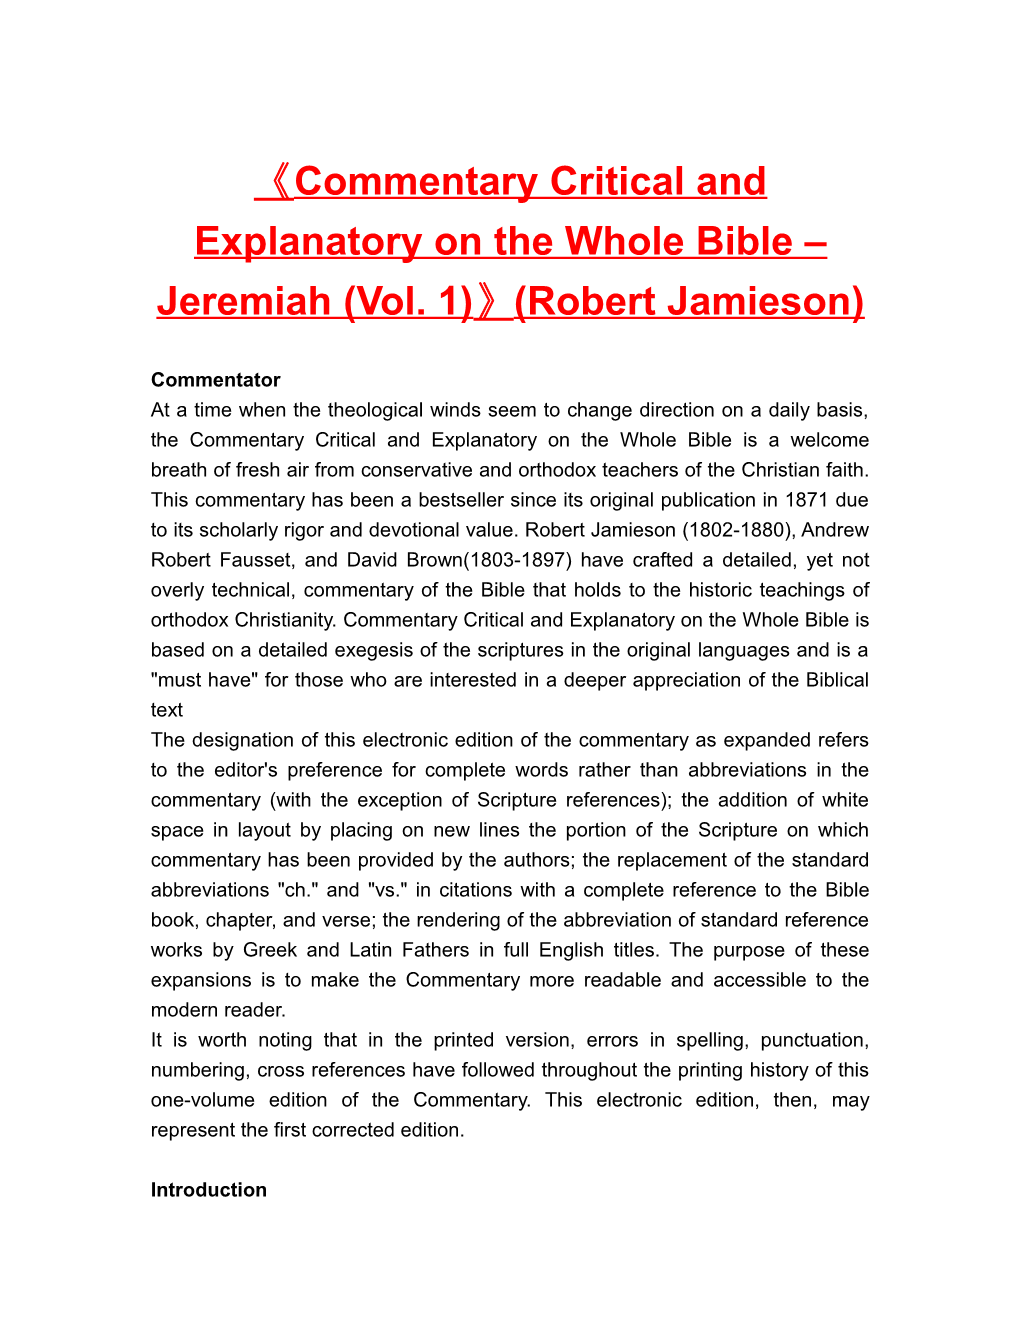 Commentary Critical and Explanatory on the Whole Bible Jeremiah (Vol. 1) (Robert Jamieson)